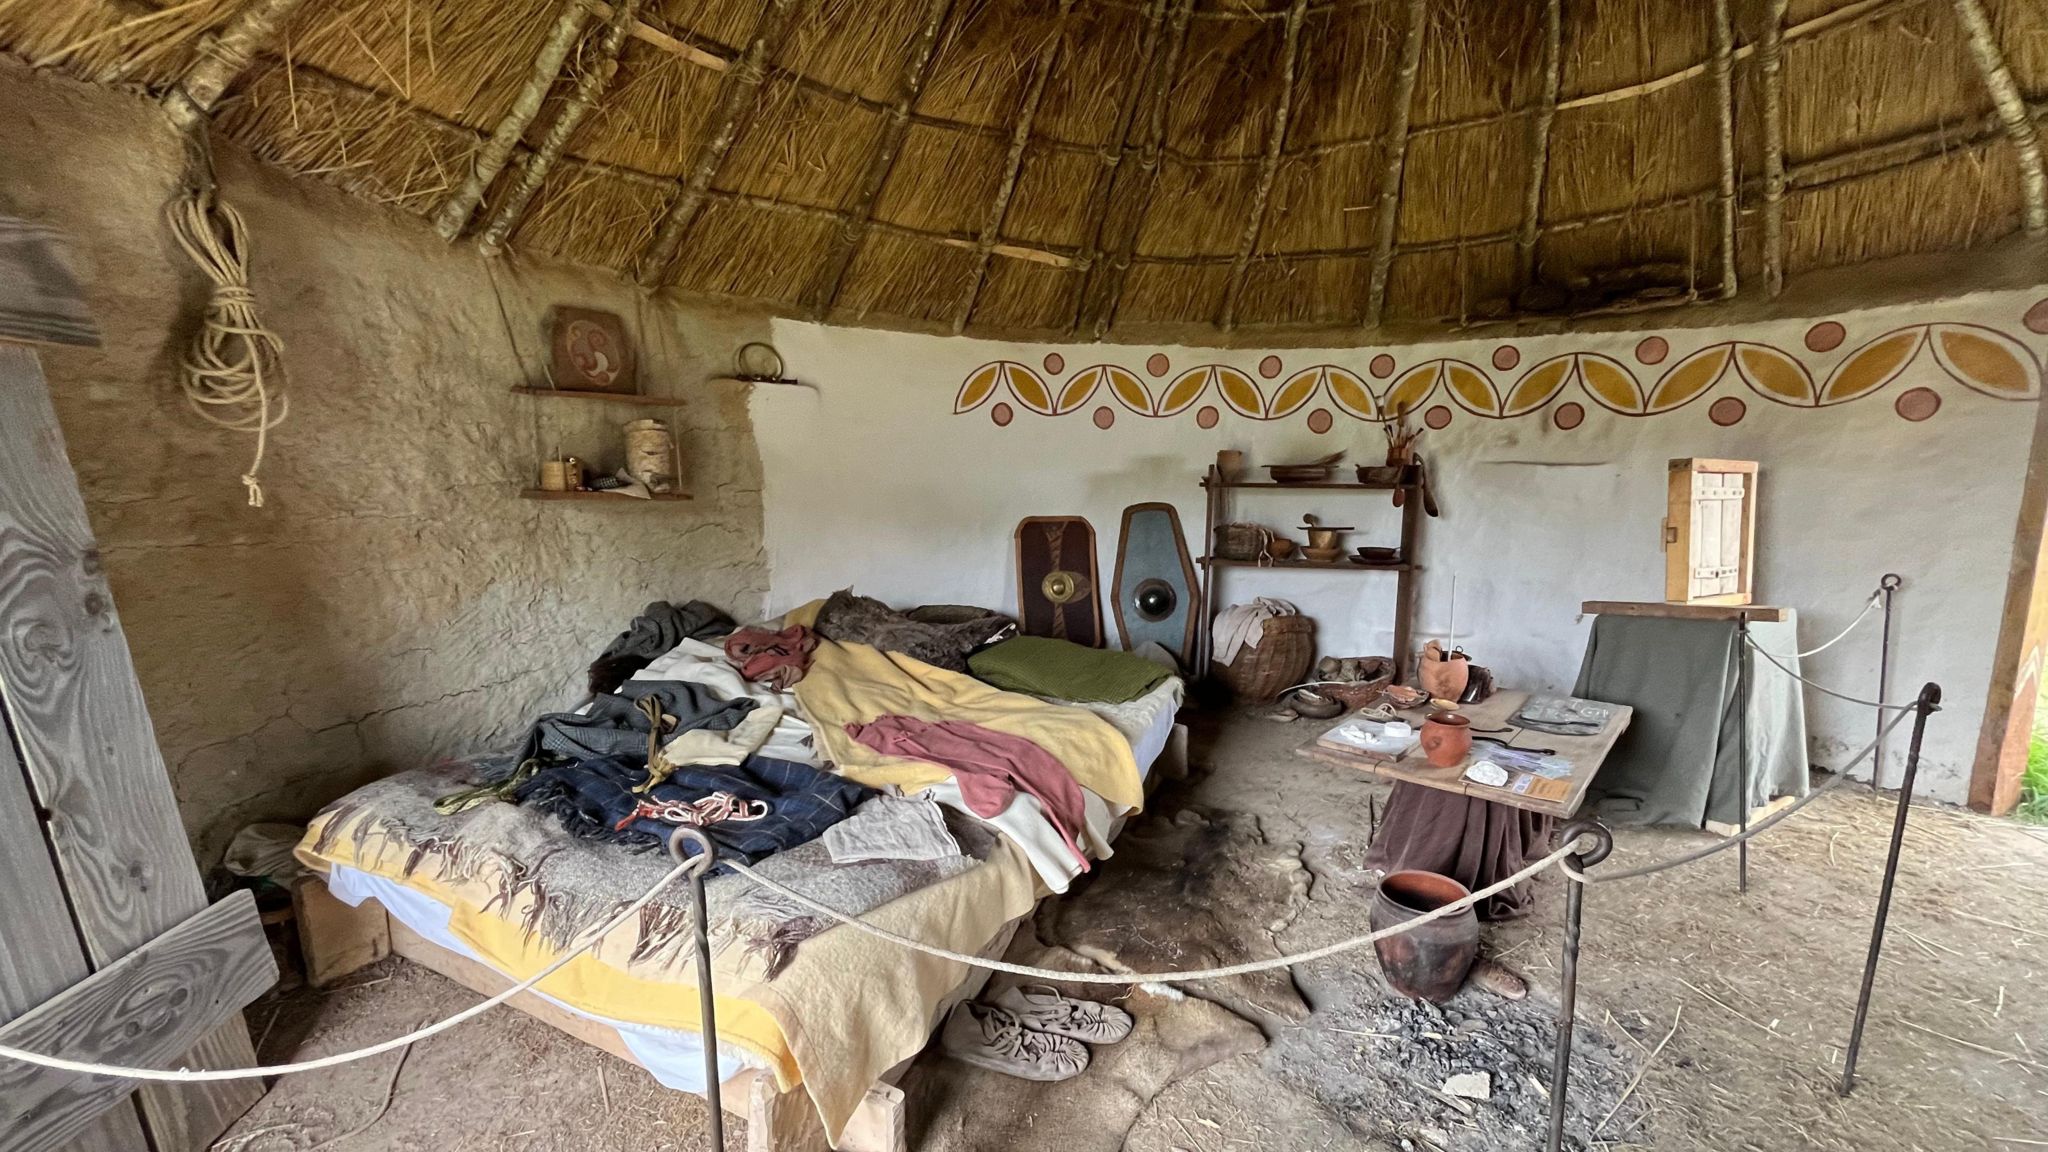 The inside of a small round building with a thatched roof, half mud walls and have painted white with a little decoration. Objects include a bed, animals skins and pots.